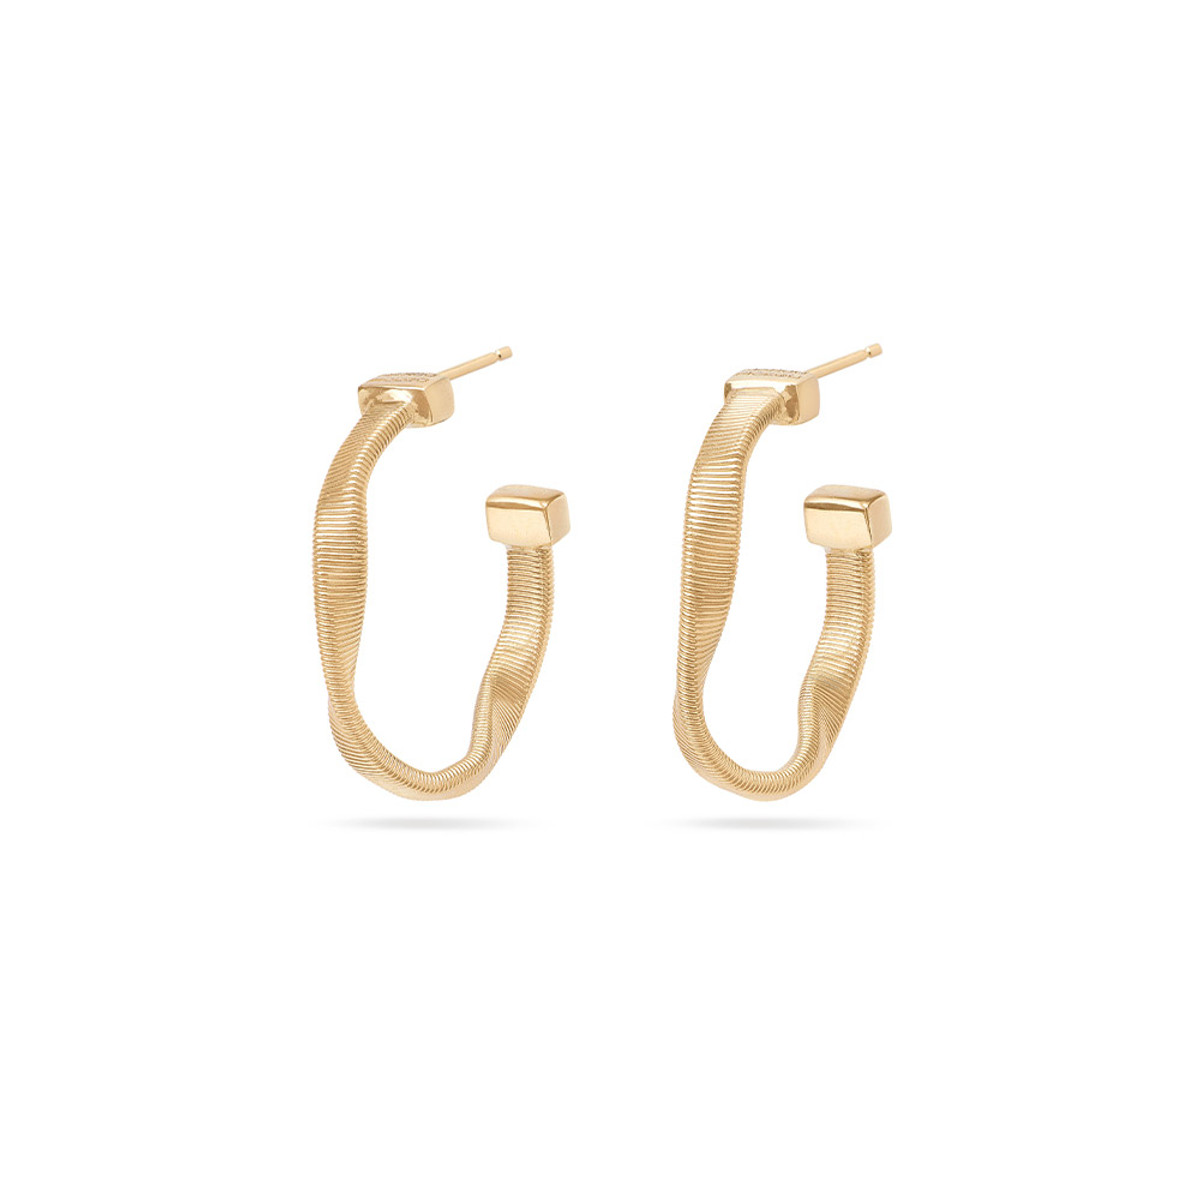 Marco Bicego Marrakech Collection 18K Yellow Gold Large Hand Twisted Earrings-54247 Product Image